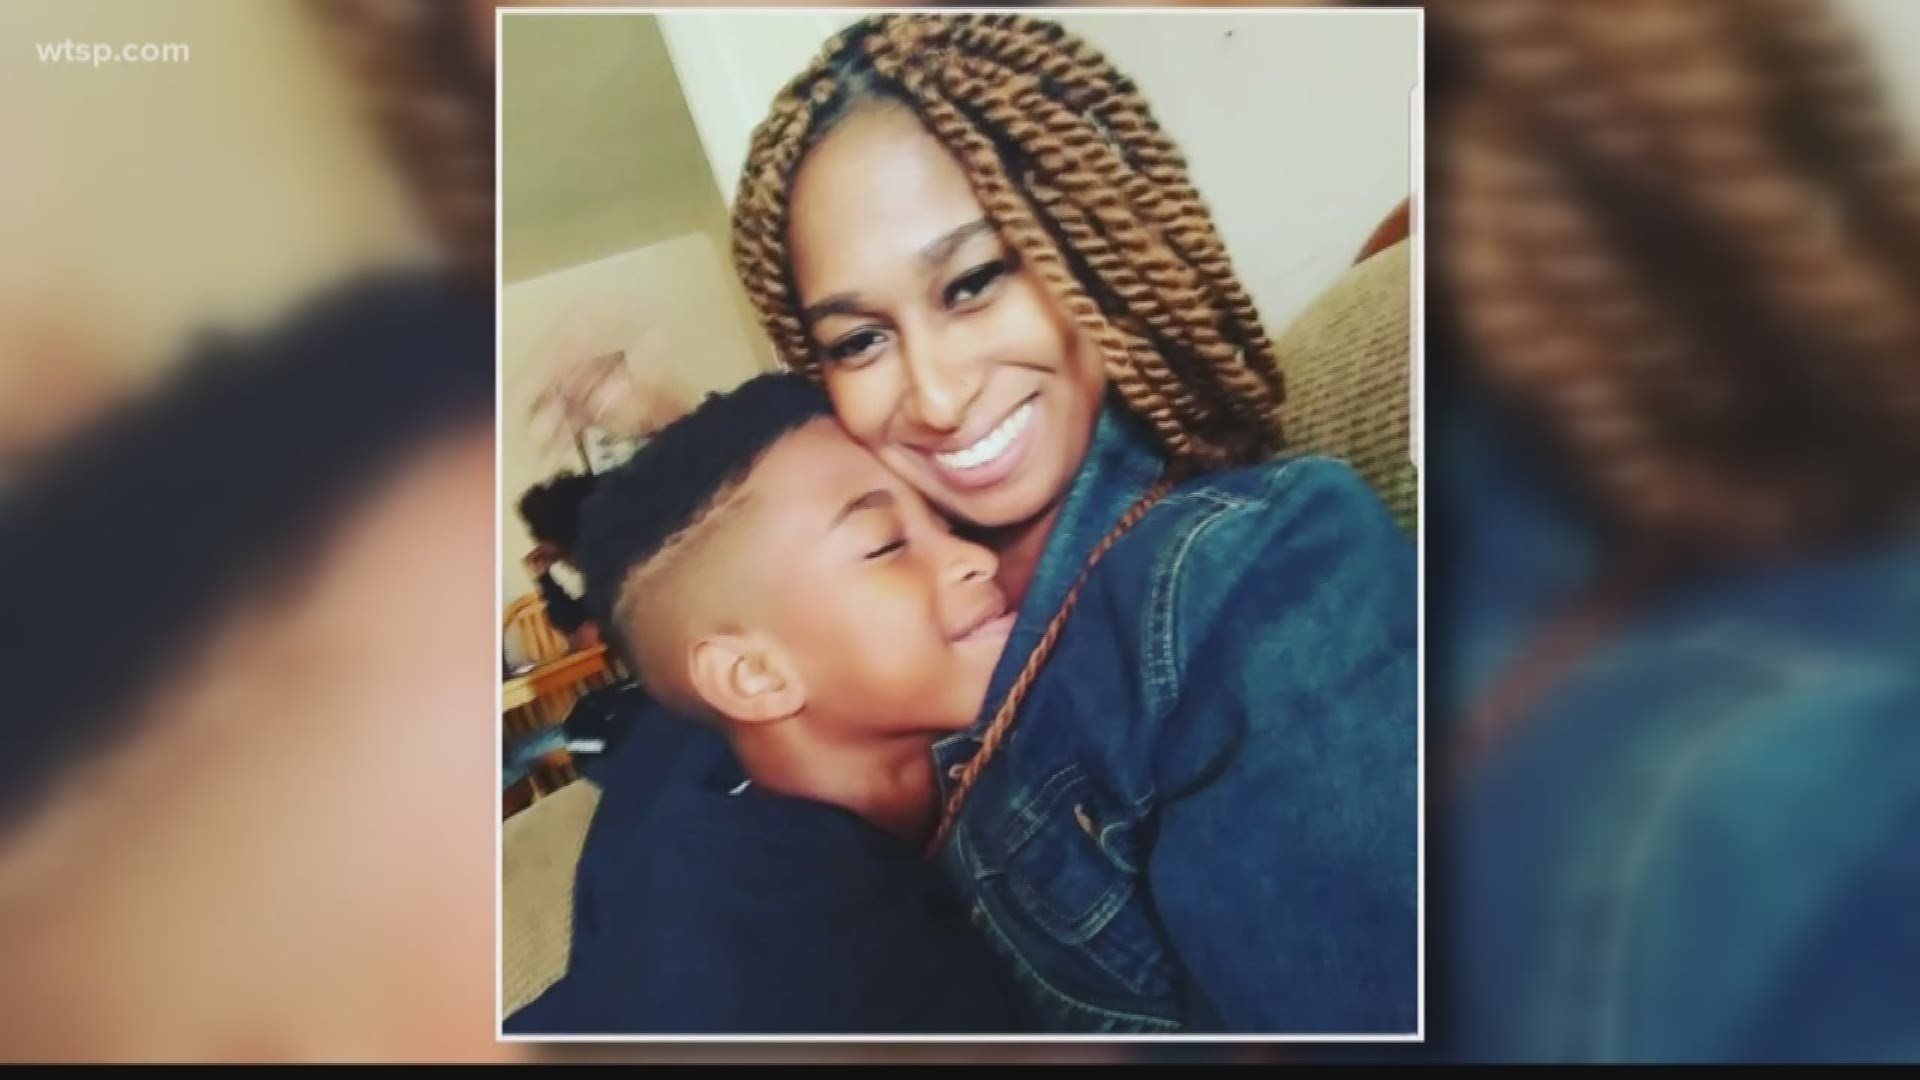 It was an emotional goodbye for a mom and her 10-year-old son, who were shot and killed in Tampa.